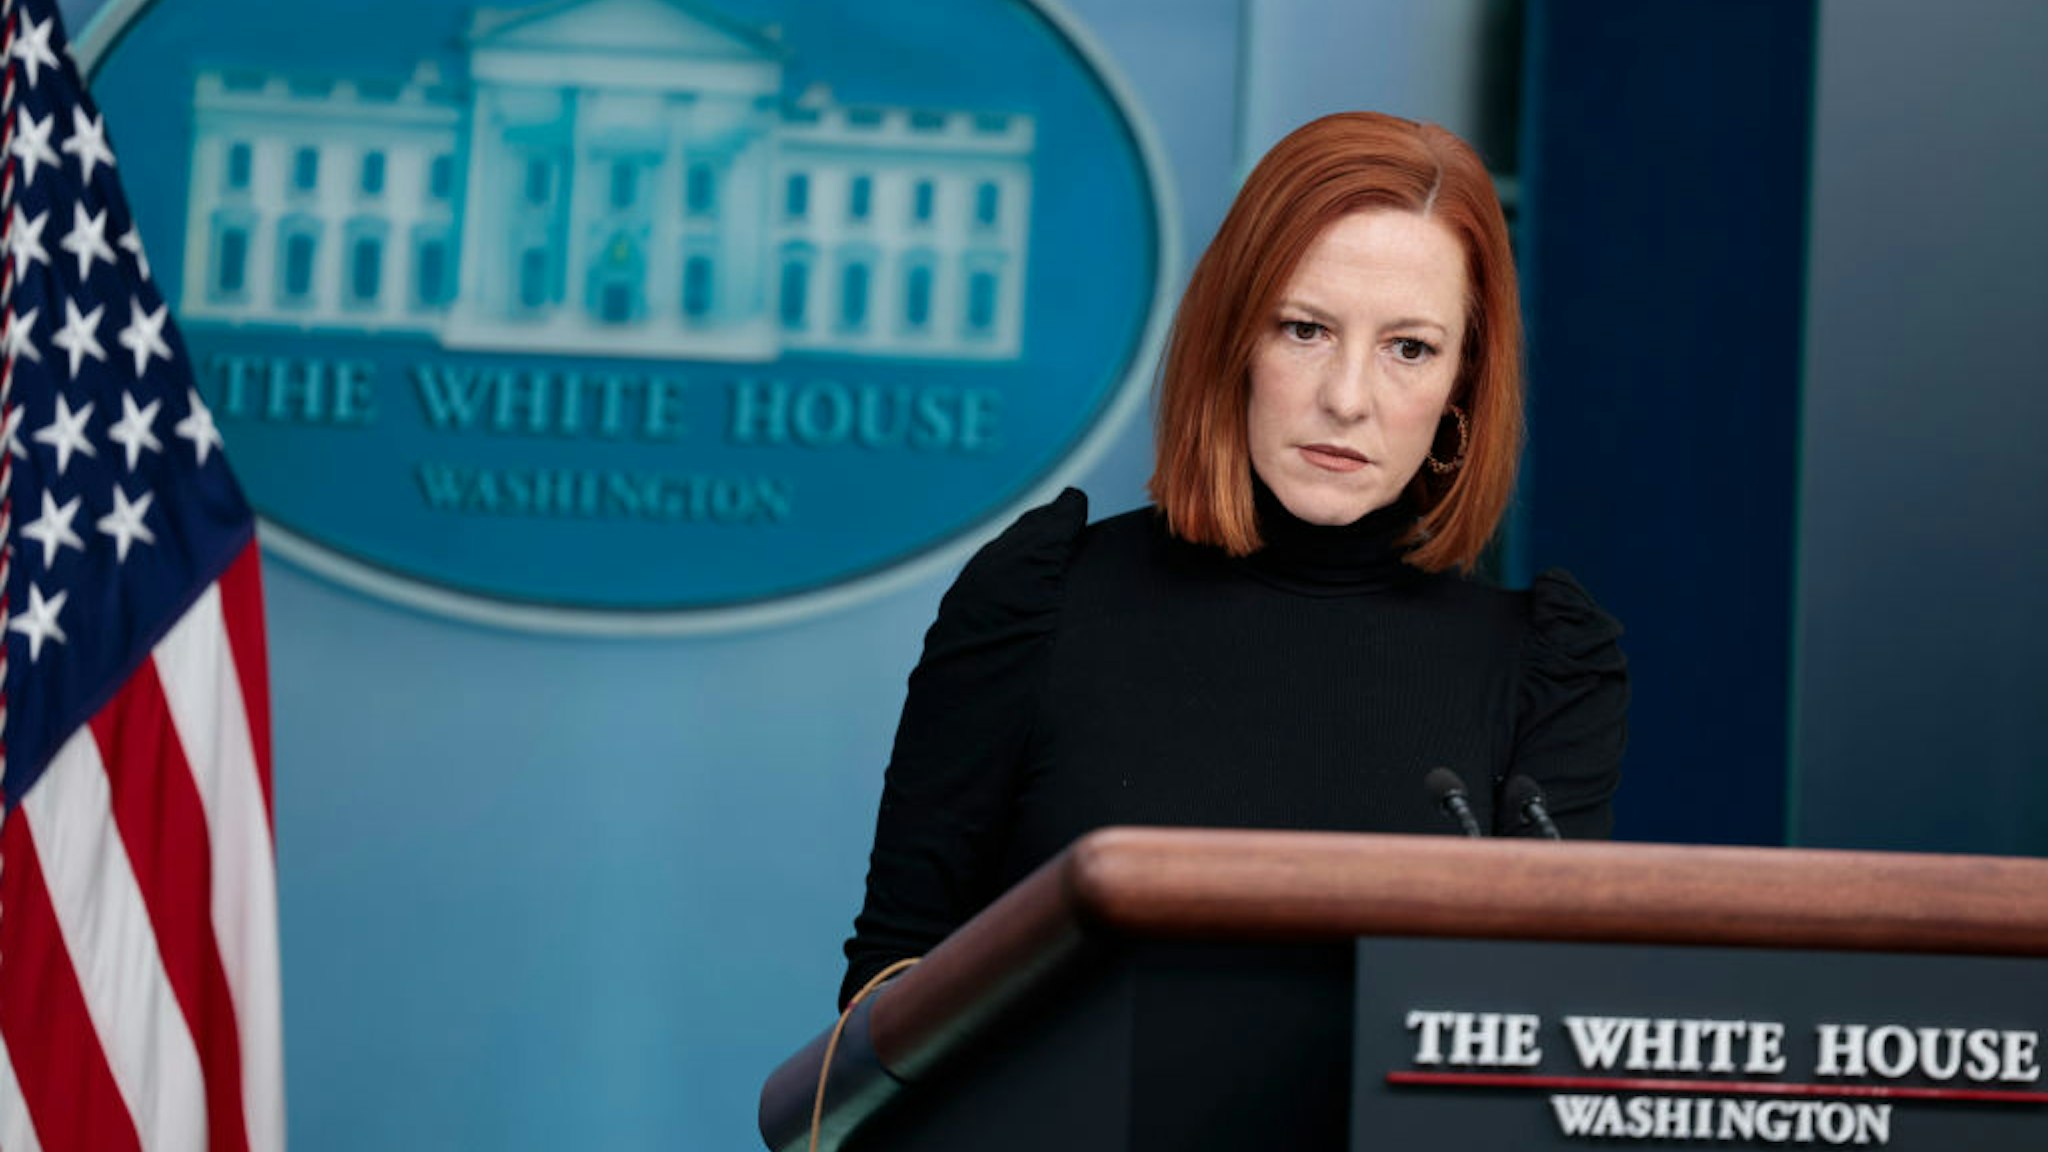 WASHINGTON, DC - FEBRUARY 08: White House press secretary Jen Psaki speaks during the daily White House press briefing on February 08, 2022 in Washington, DC. During the press briefing Psaki spoke on a range of topics including the resignation of Eric Lander as director of the Office of Science and Technology Policy, German Chancellor Olaf Scholz's visit to the White House and unionization of Capitol Hill staffers. (Photo by Anna Moneymaker/Getty Images)